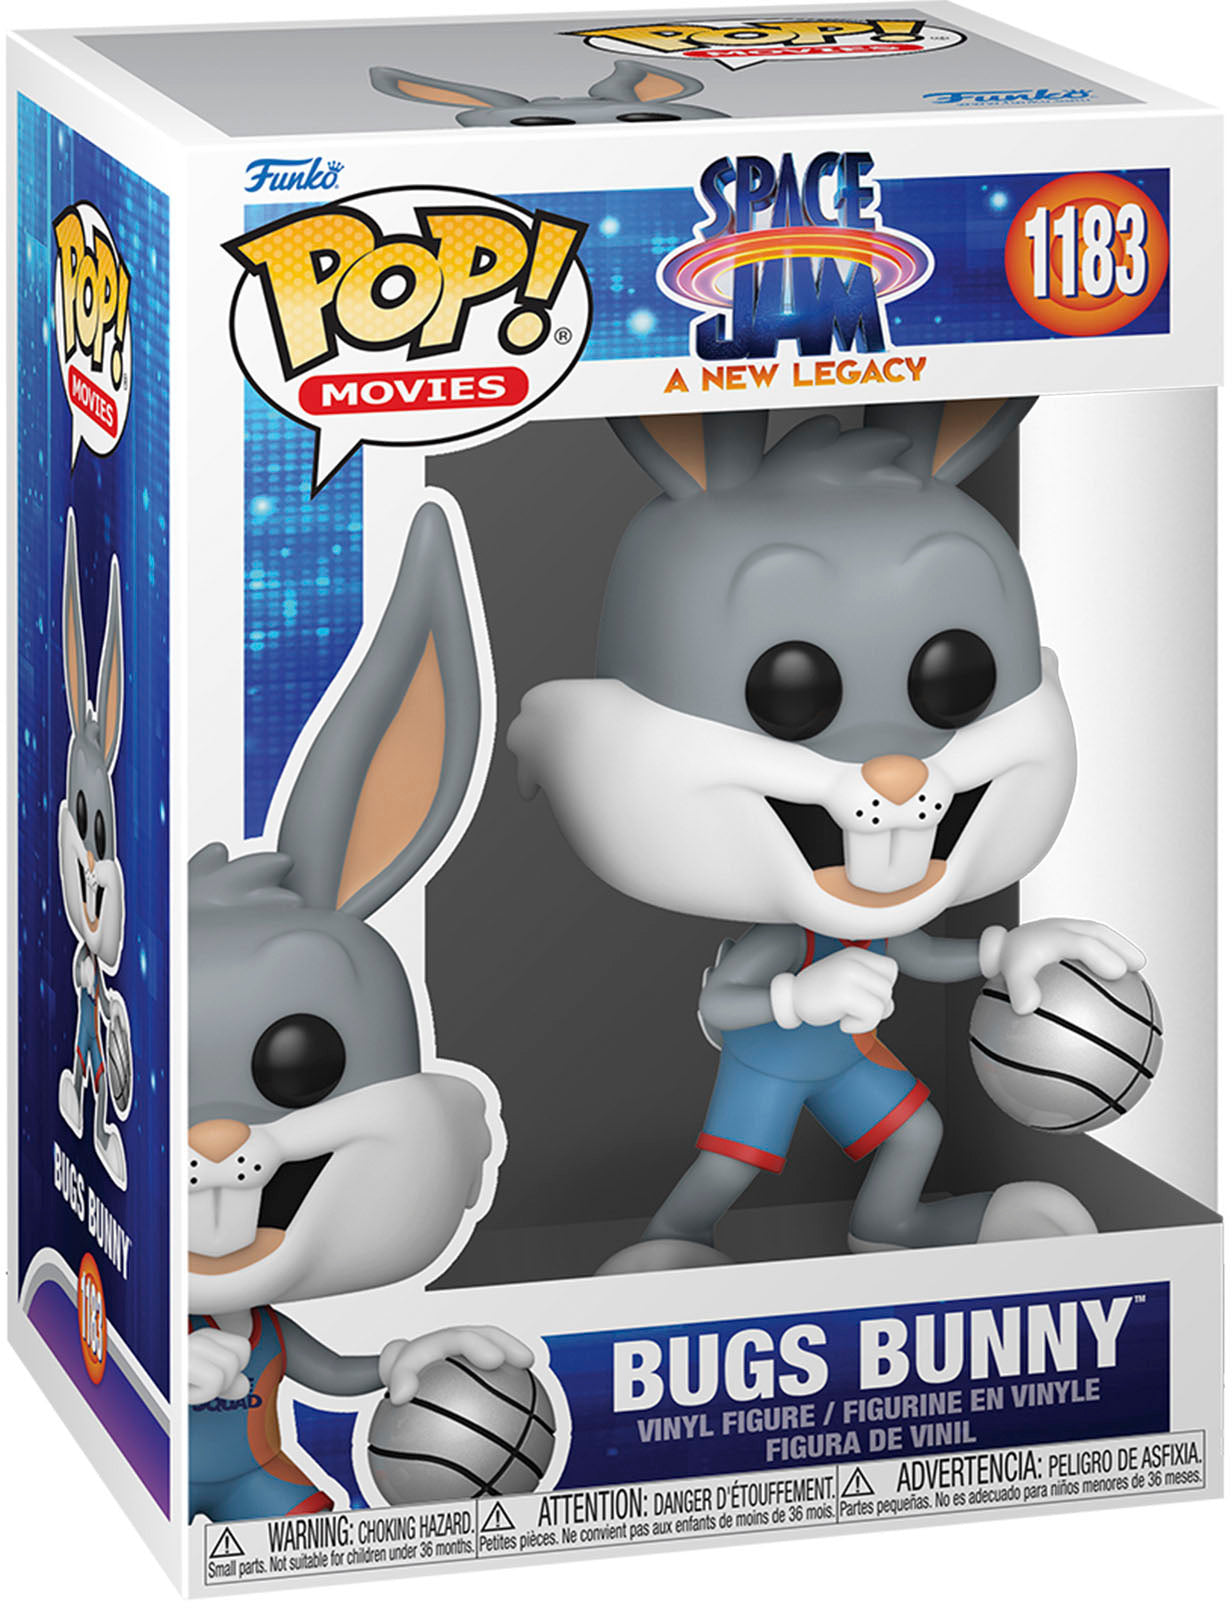 BUGS DRIBBLING FUNKO POP SPACE JAM 2 A NEW LEGACY 1183 W/ PROTECTOR